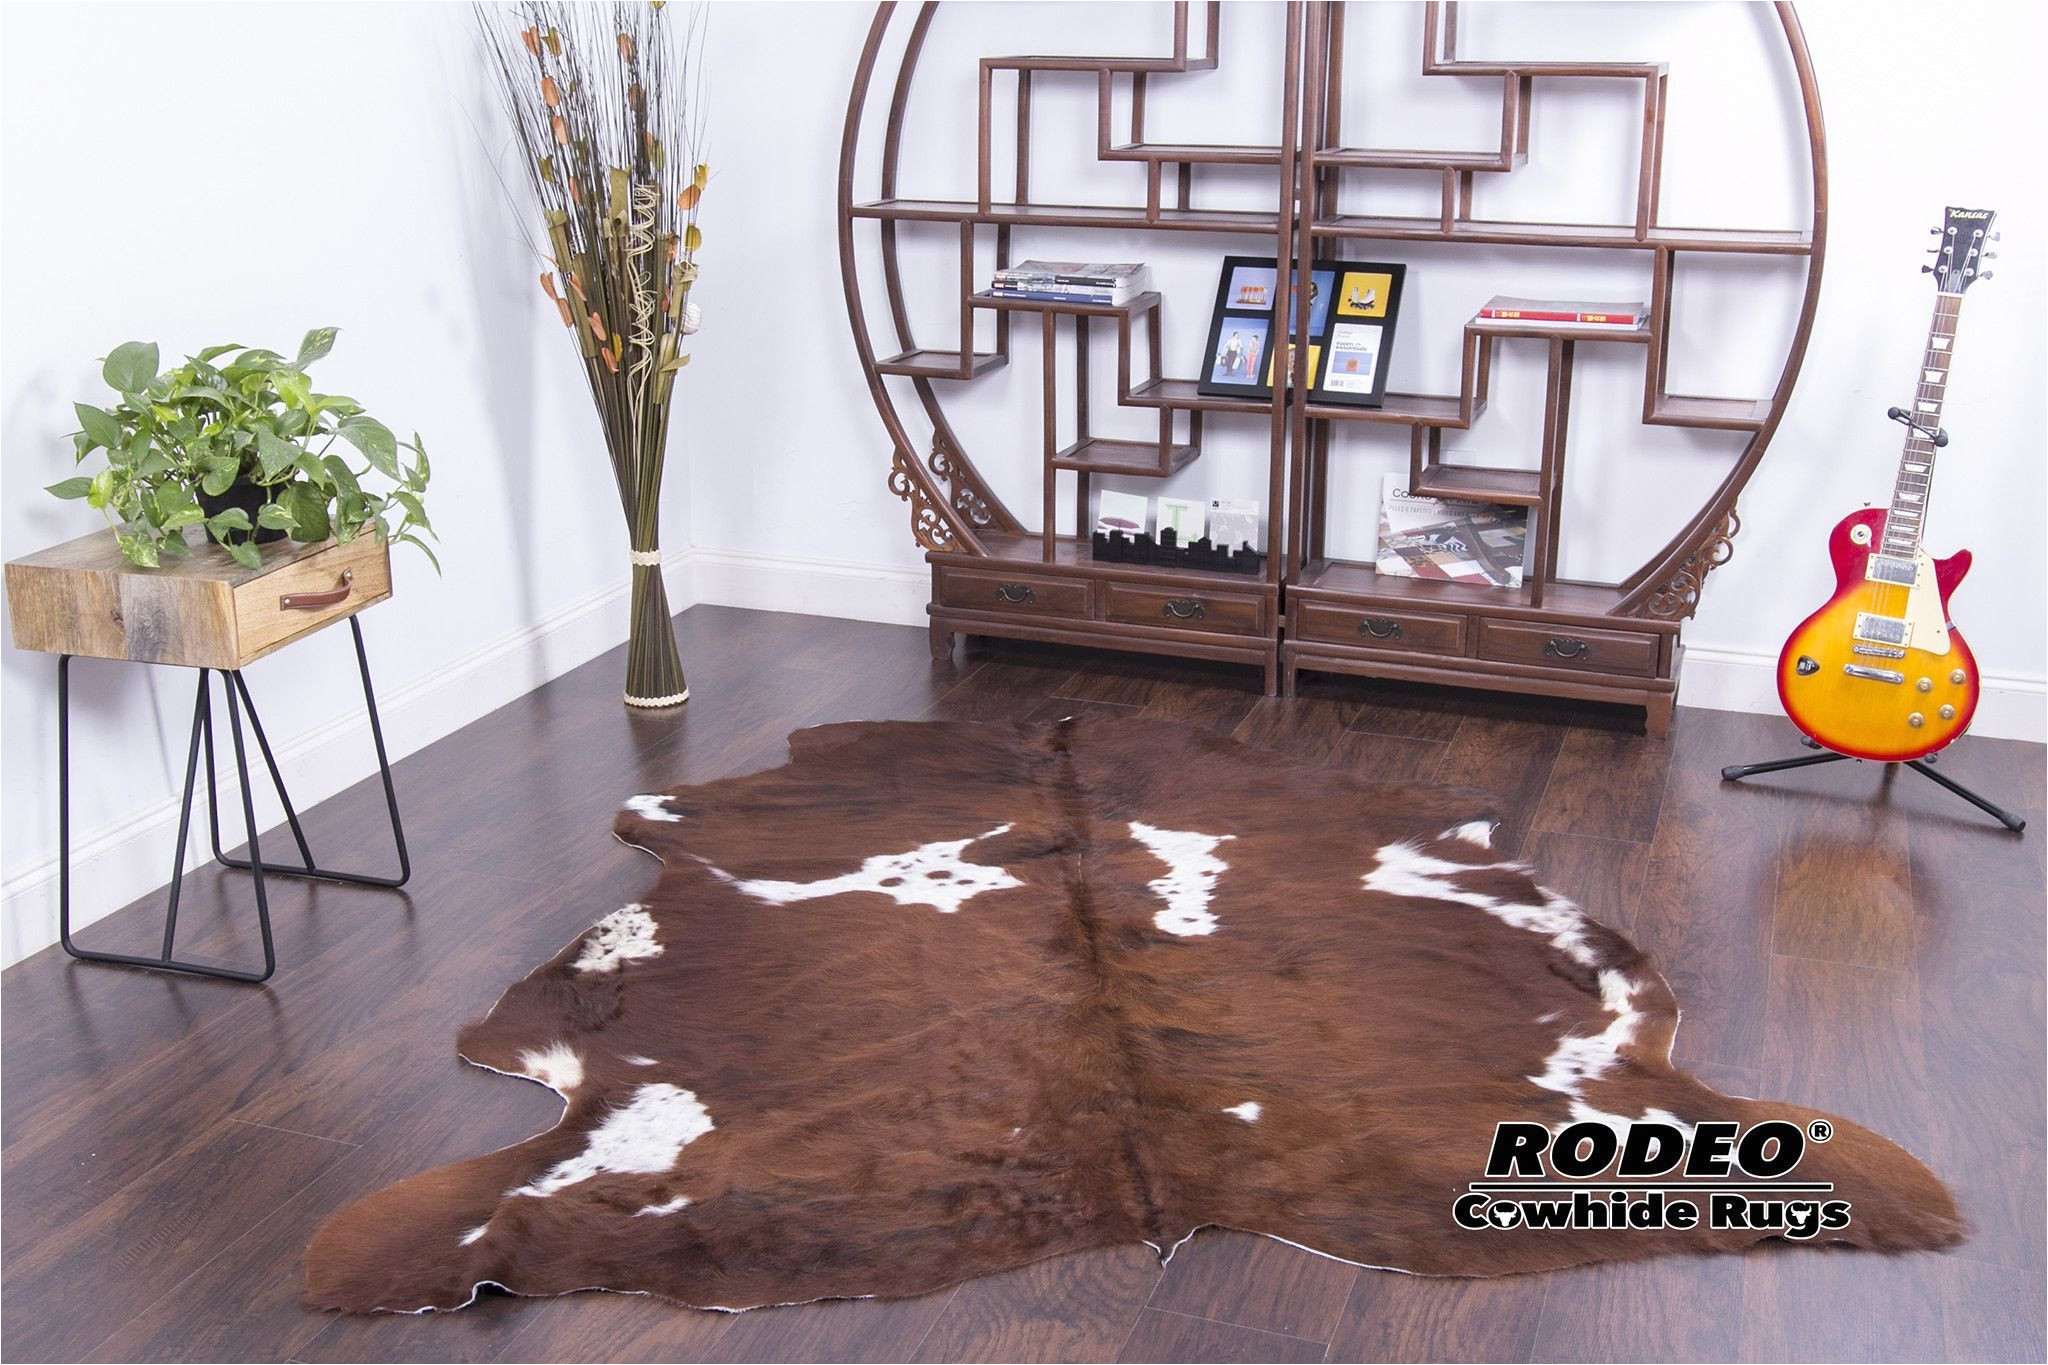 Where Can I Buy Cowhide Rugs Near Me | AdinaPorter